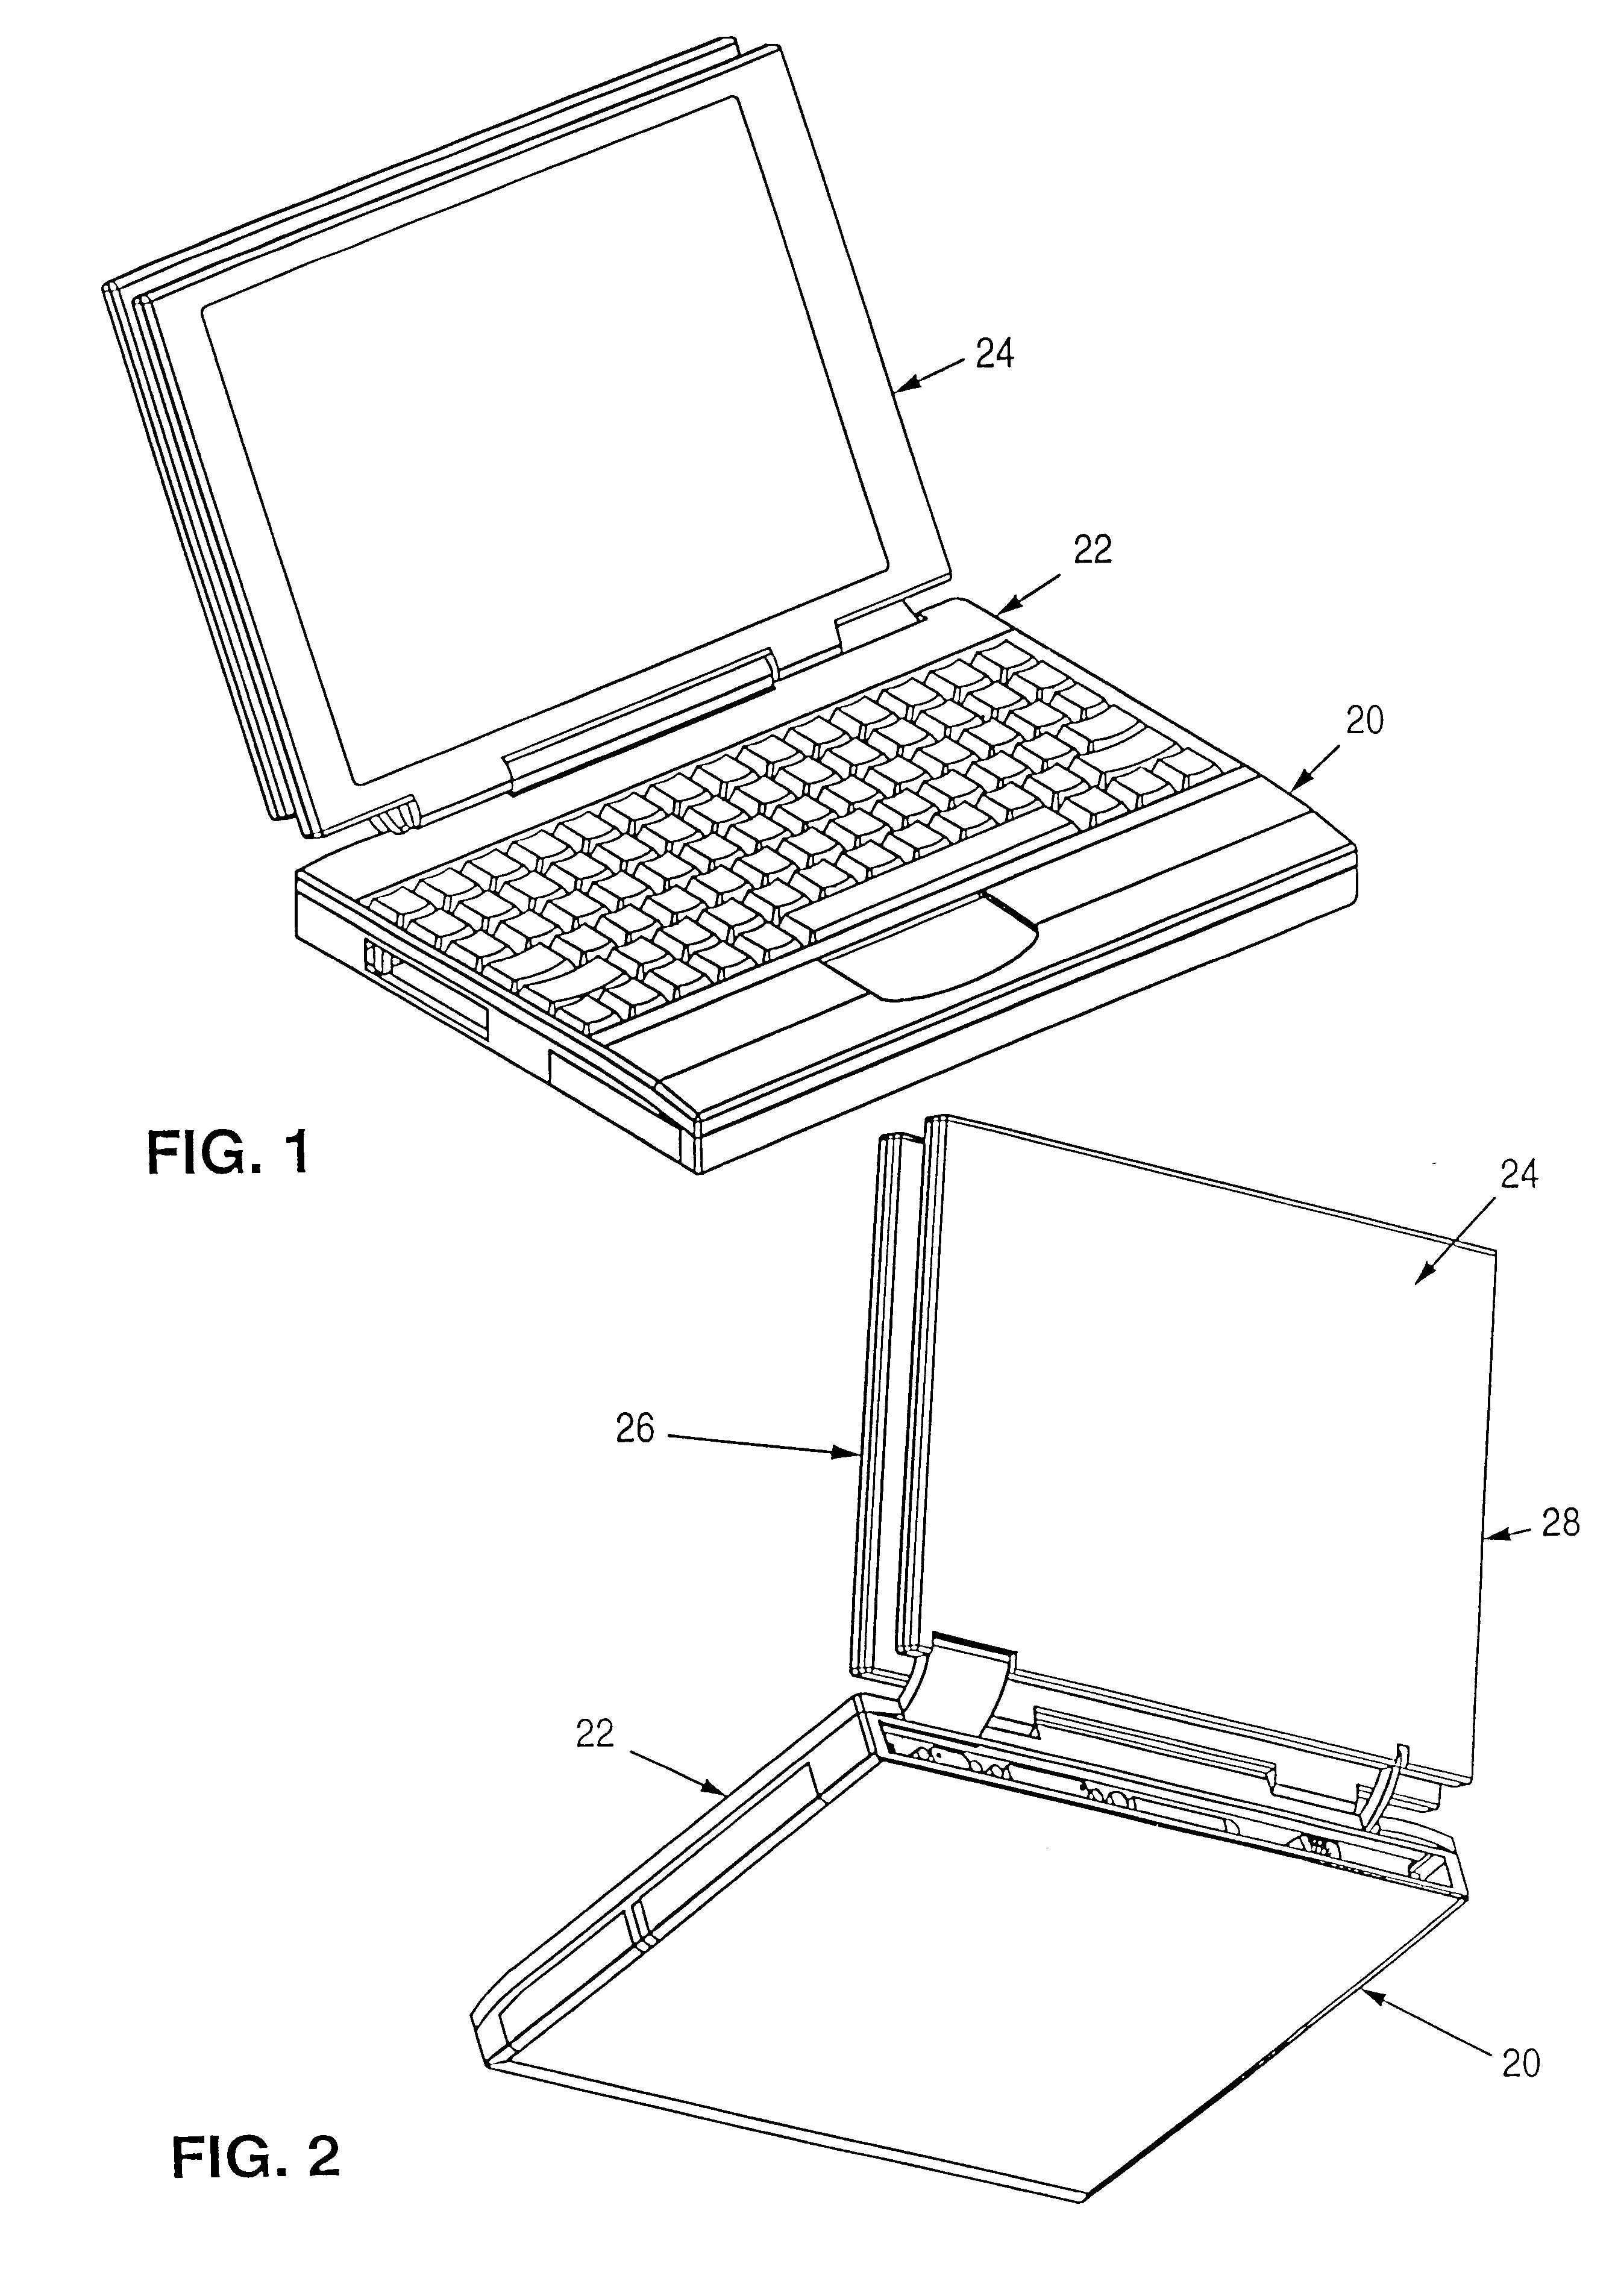 Thermally efficient portable computer incorporating deploying CPU module